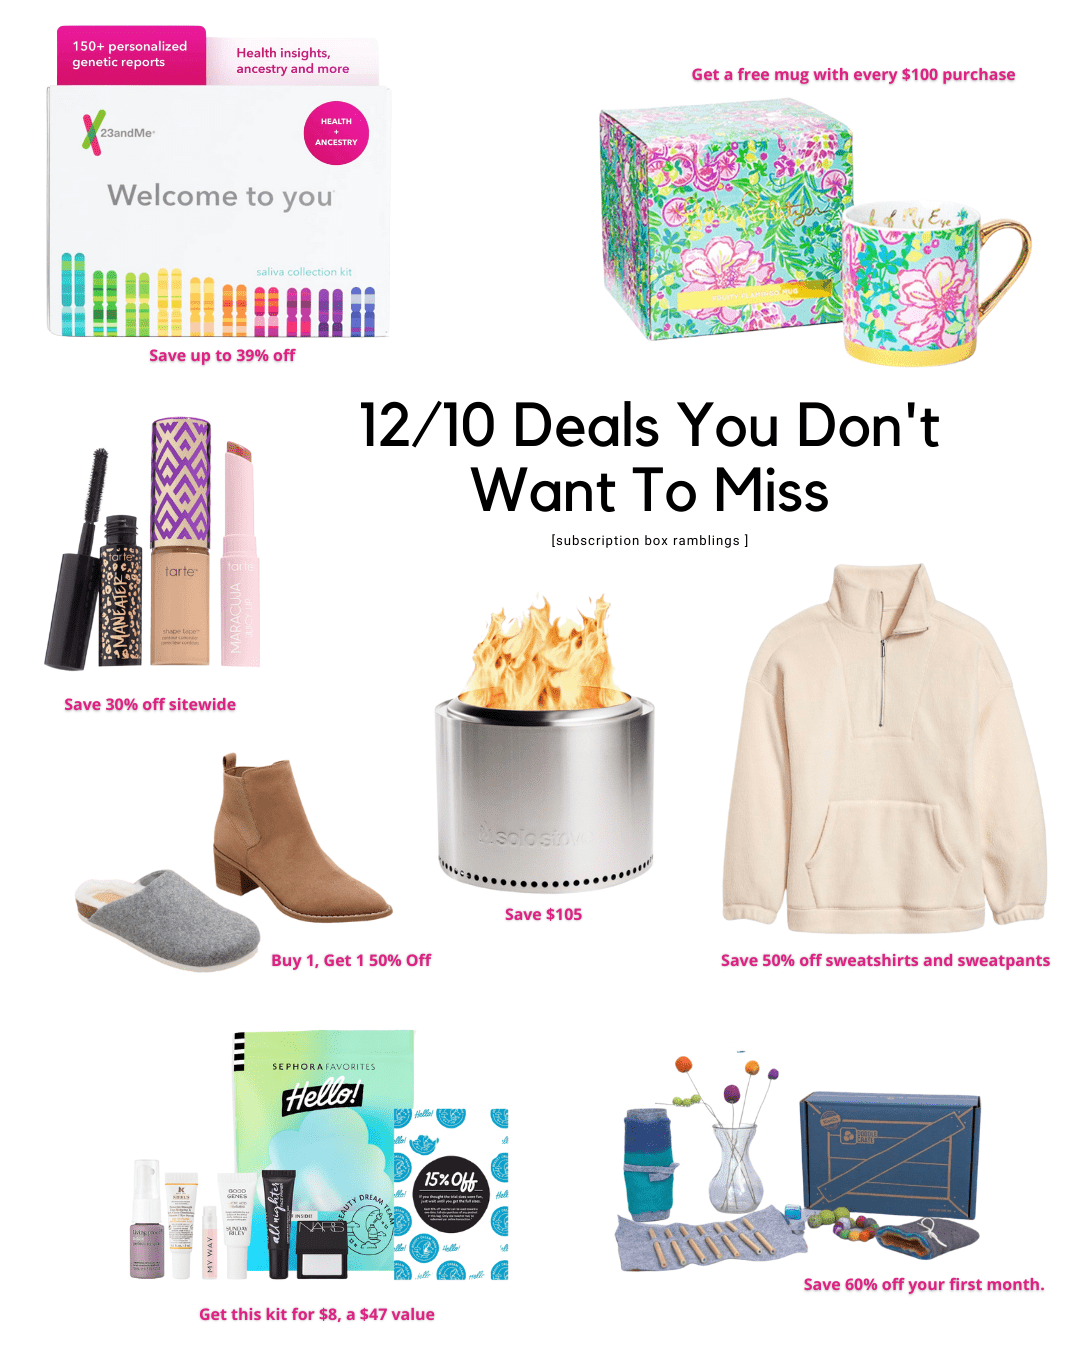 Deals You Don’t Want to Miss – 12/10